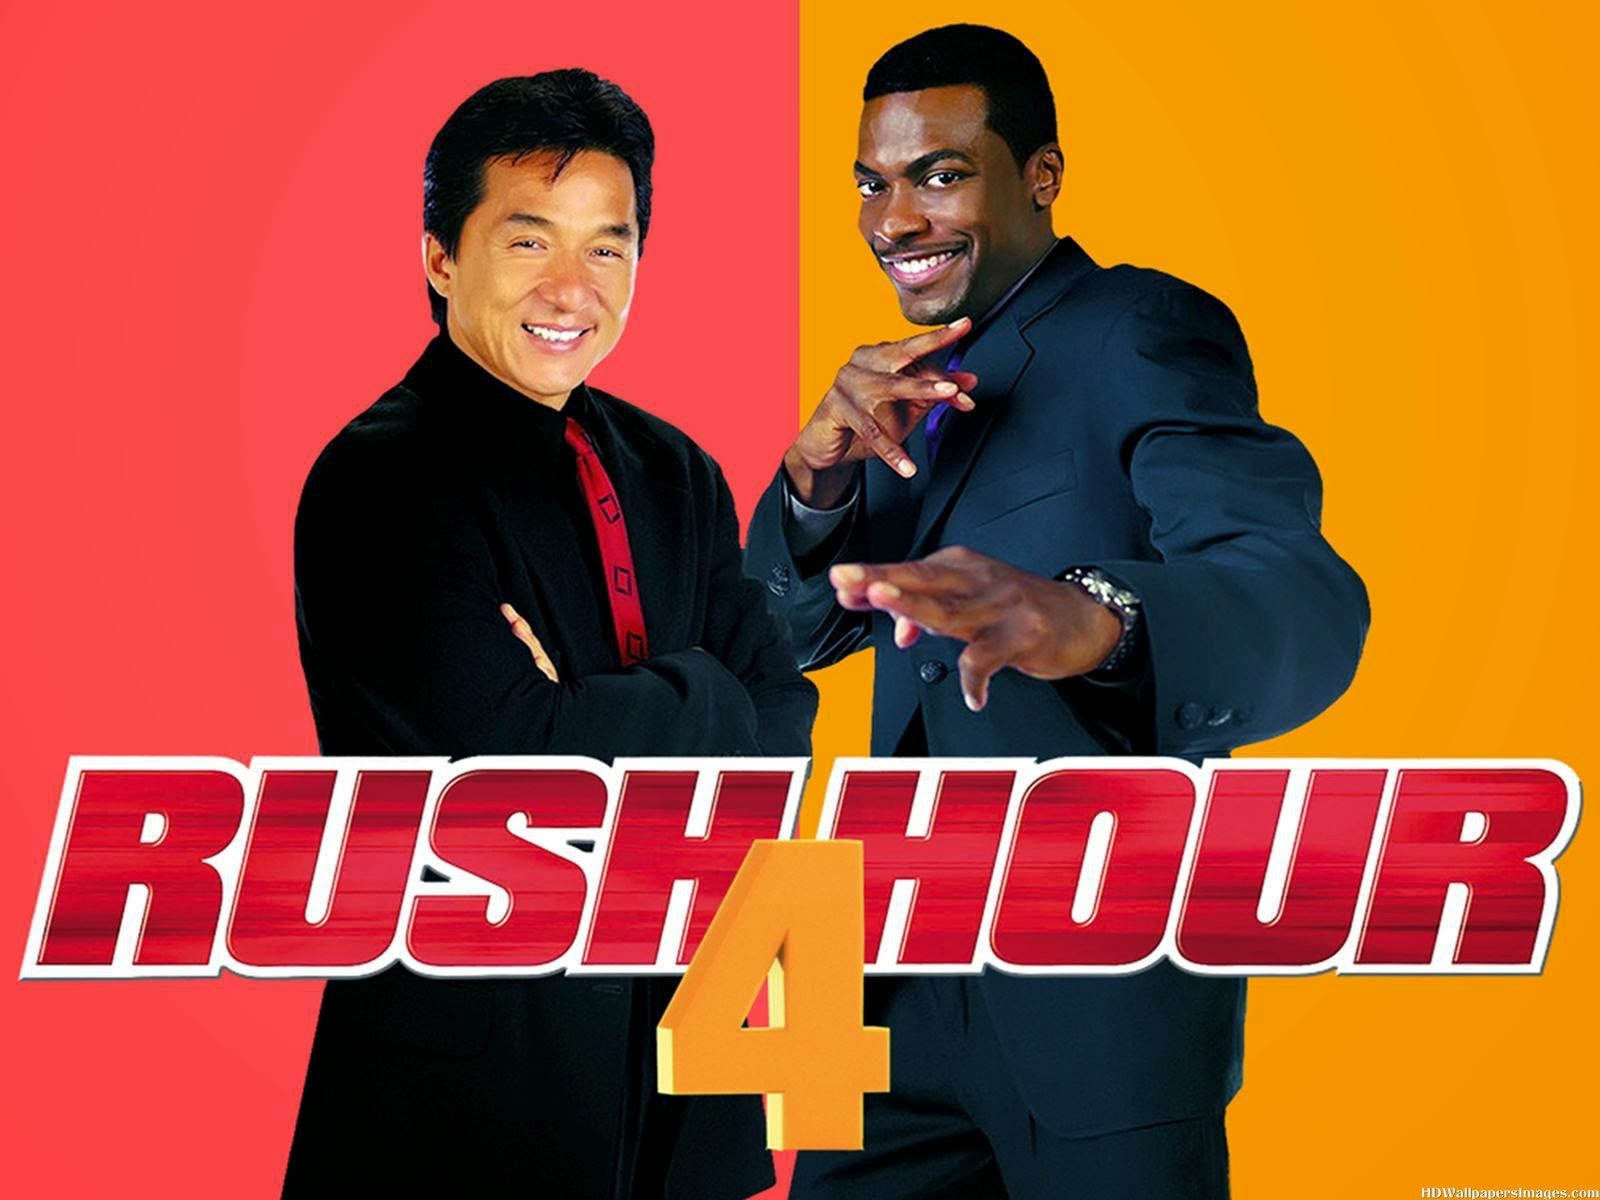 Chris tucker confirms ‘rush hour 4’ is finally happening